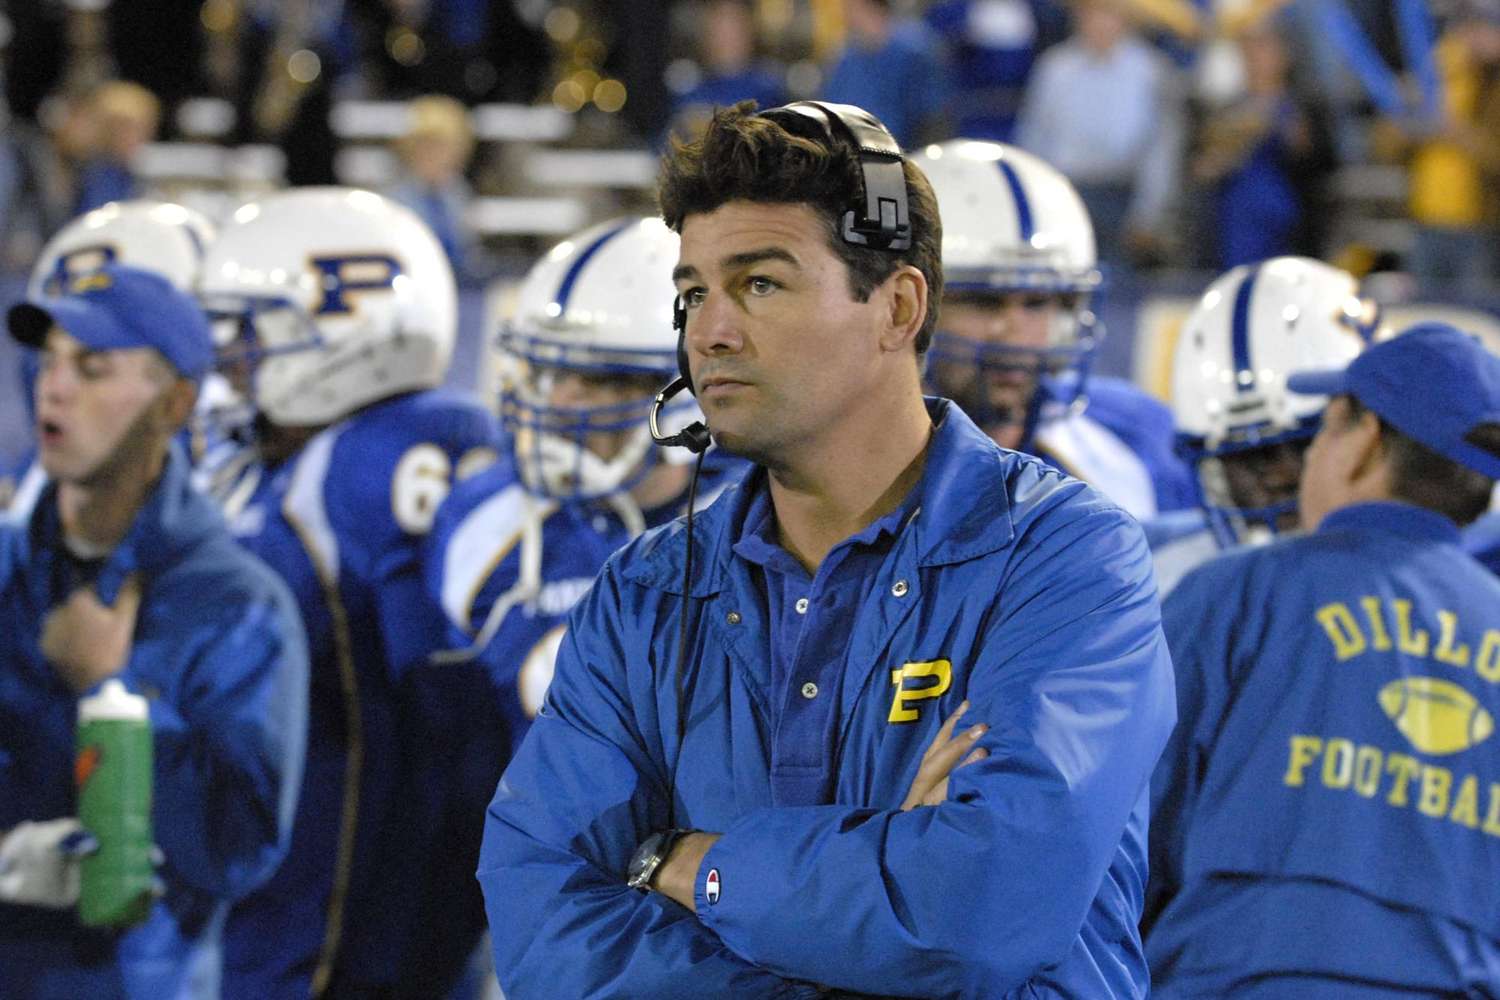 Friday Night Lights coach Gary Gaines dead at 73 